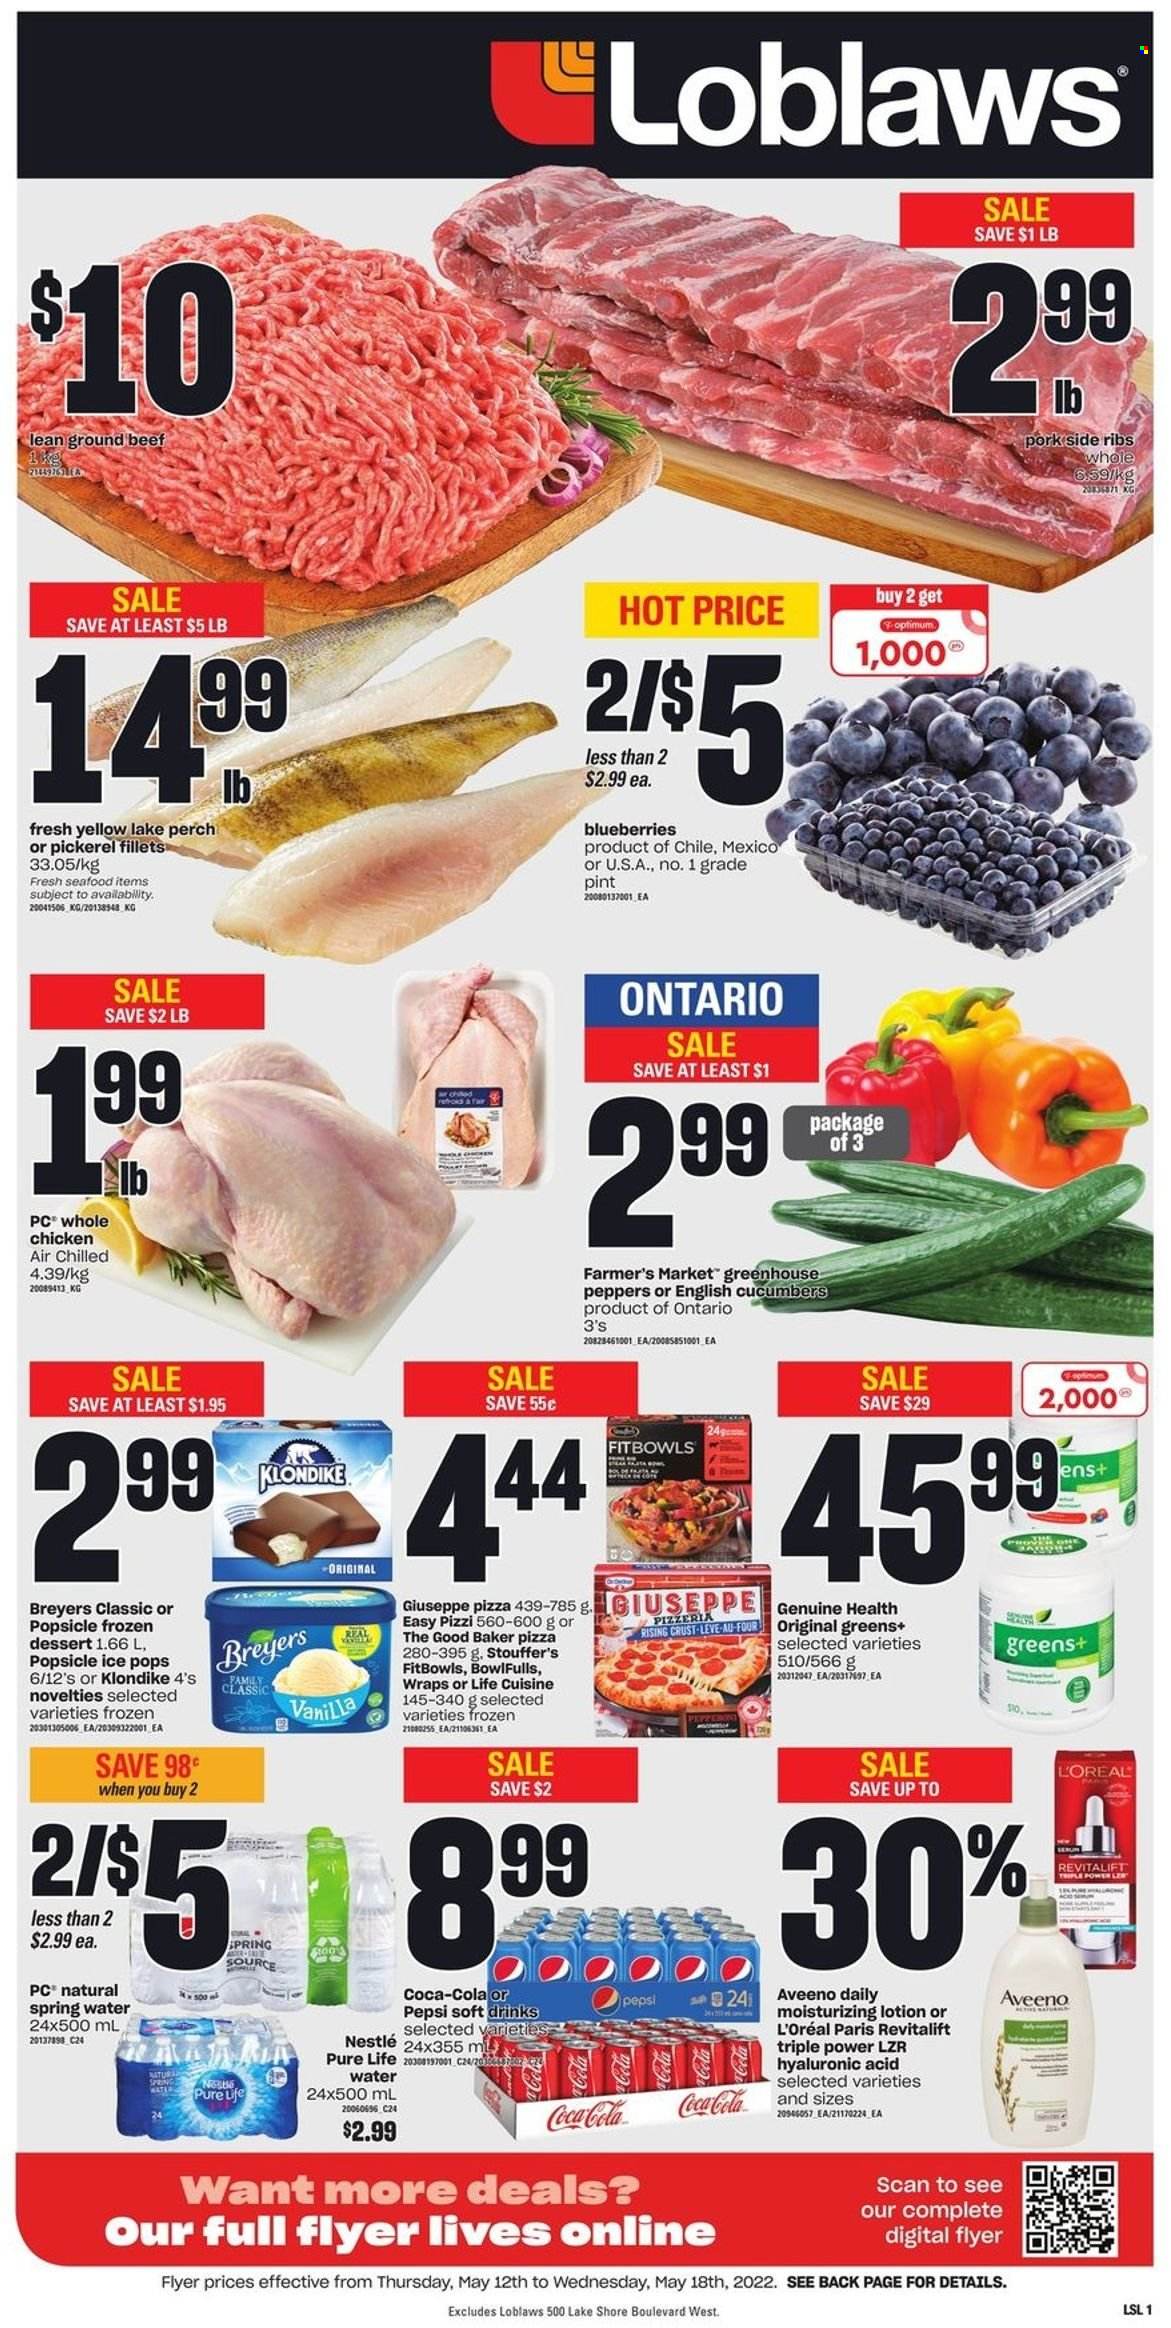 thumbnail - Loblaws Flyer - May 12, 2022 - May 18, 2022 - Sales products - wraps, cucumber, peppers, blueberries, perch, seafood, walleye, pizza, Stouffer's, Coca-Cola, Pepsi, soft drink, spring water, whole chicken, chicken, beef meat, ground beef, Aveeno, L’Oréal, body lotion, Nestlé. Page 1.